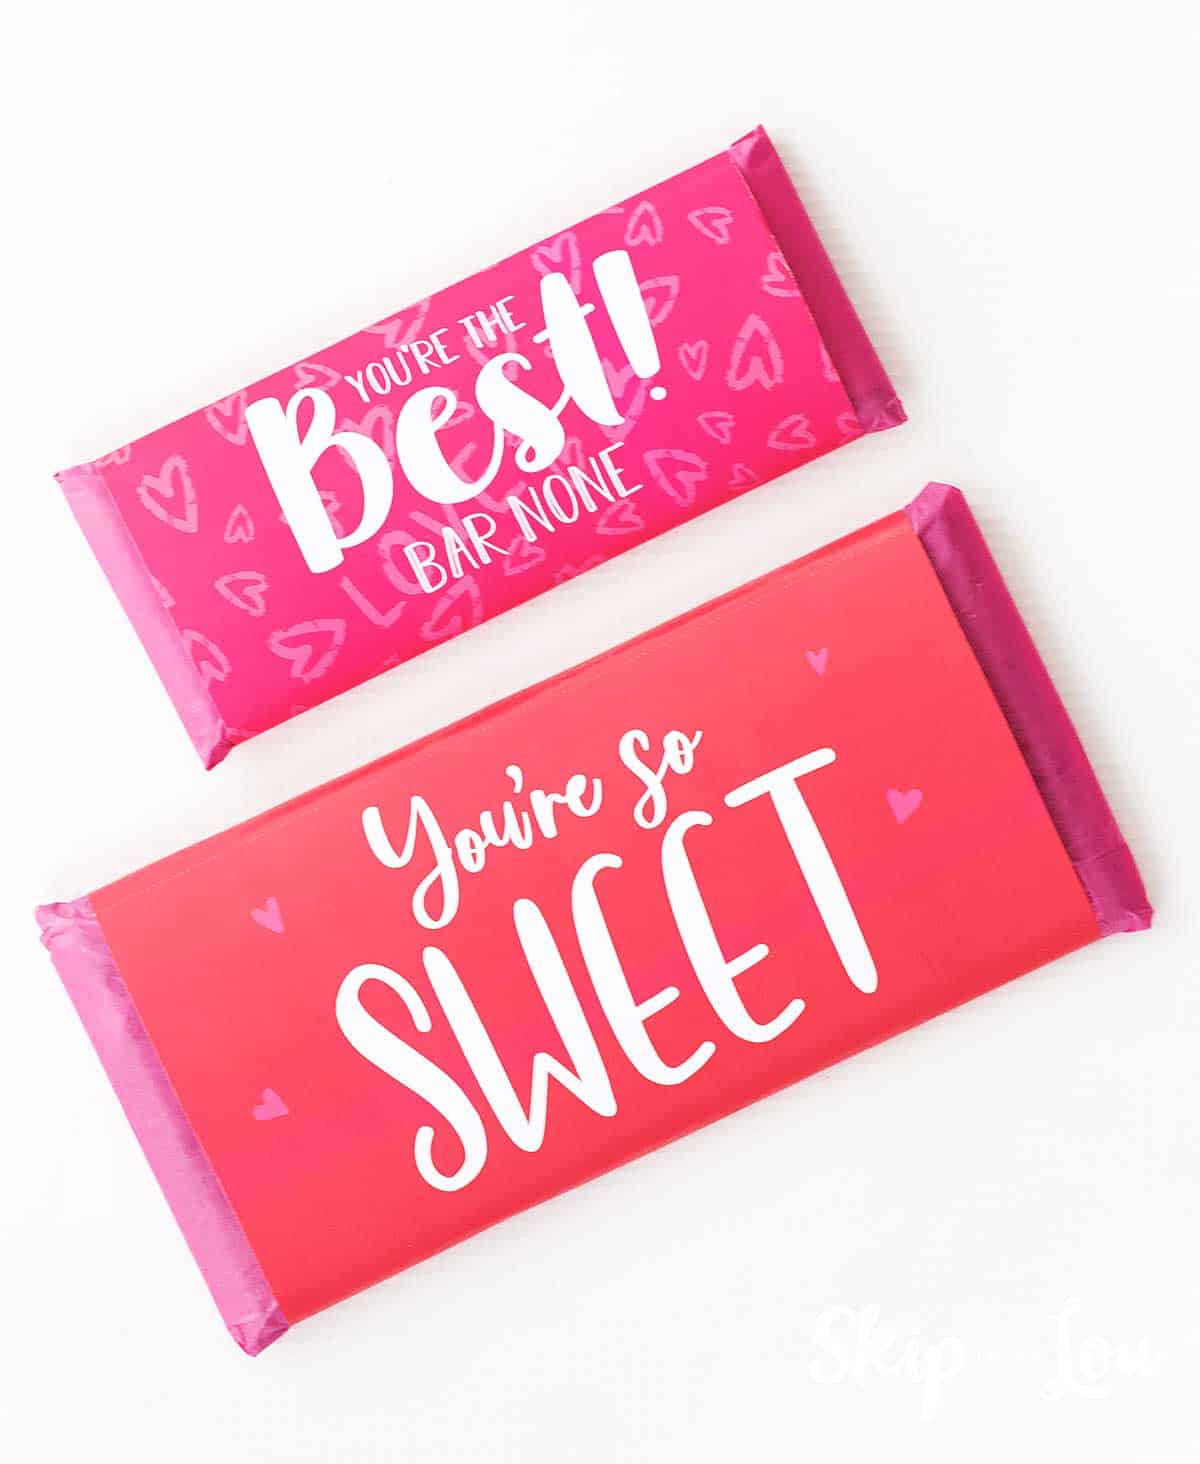 covered candy bars with cute wrappers youre the best bar none you're sweet